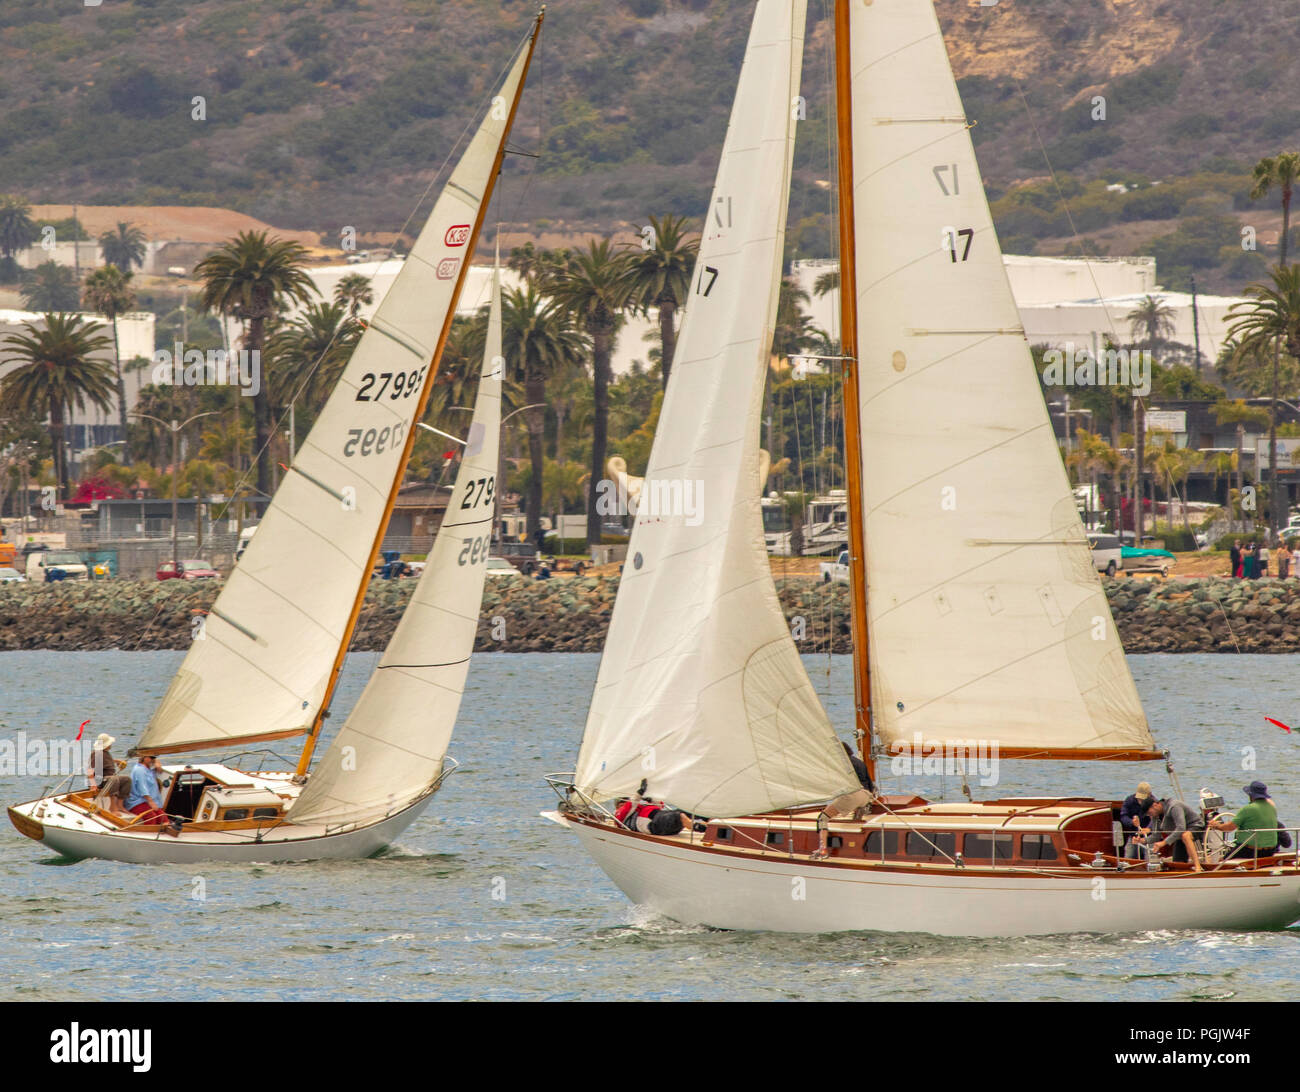 Two boats working their way upwind in a tacking duel Stock Photo